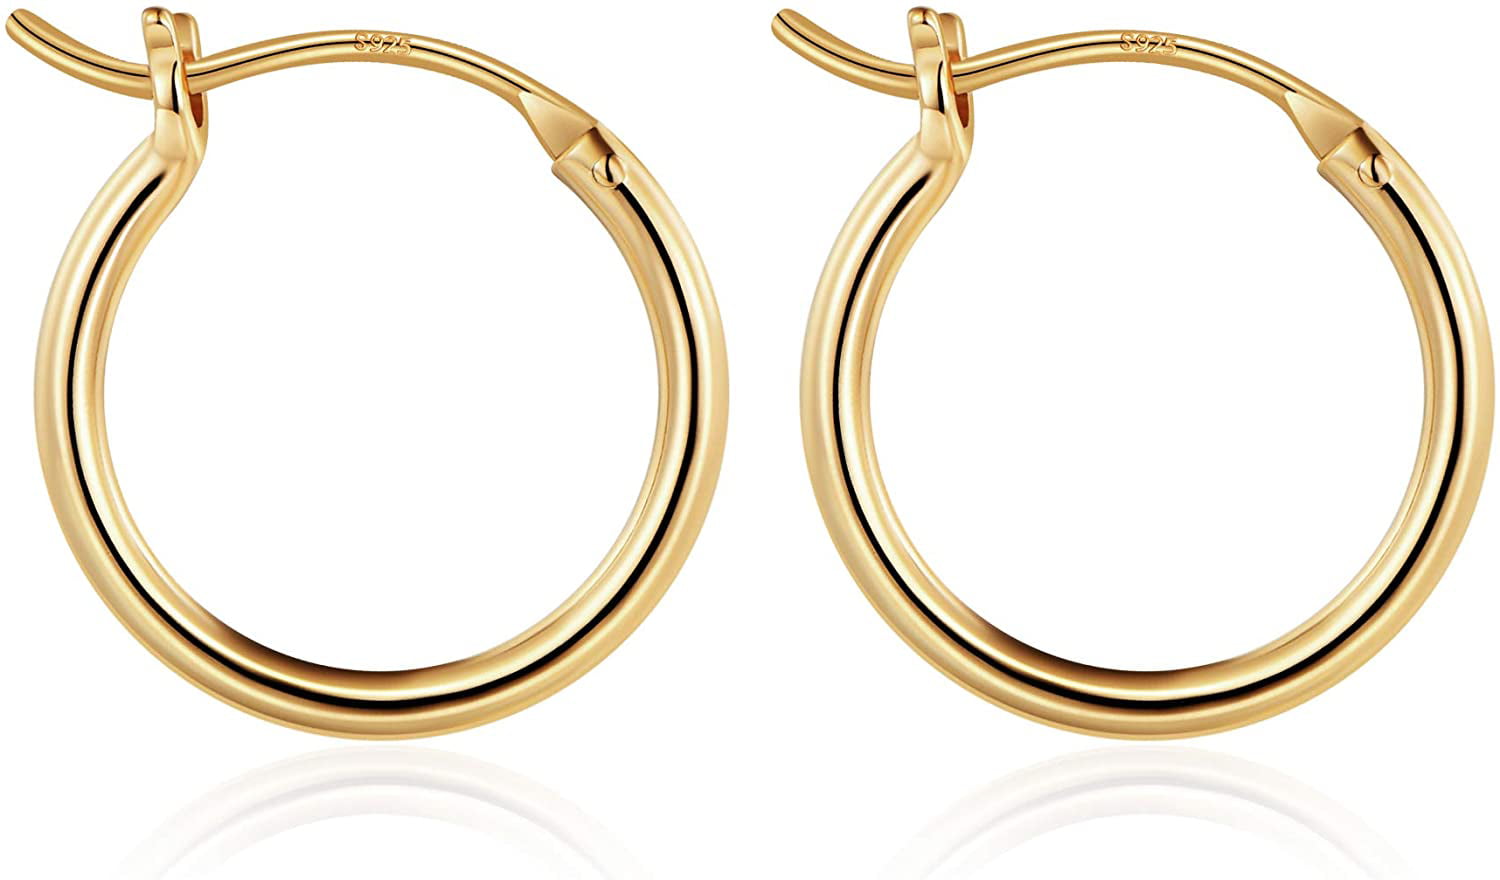 Women Fashion Gold Filled Smooth Big Round Large Hoop Sleeper Earrings Gift New 